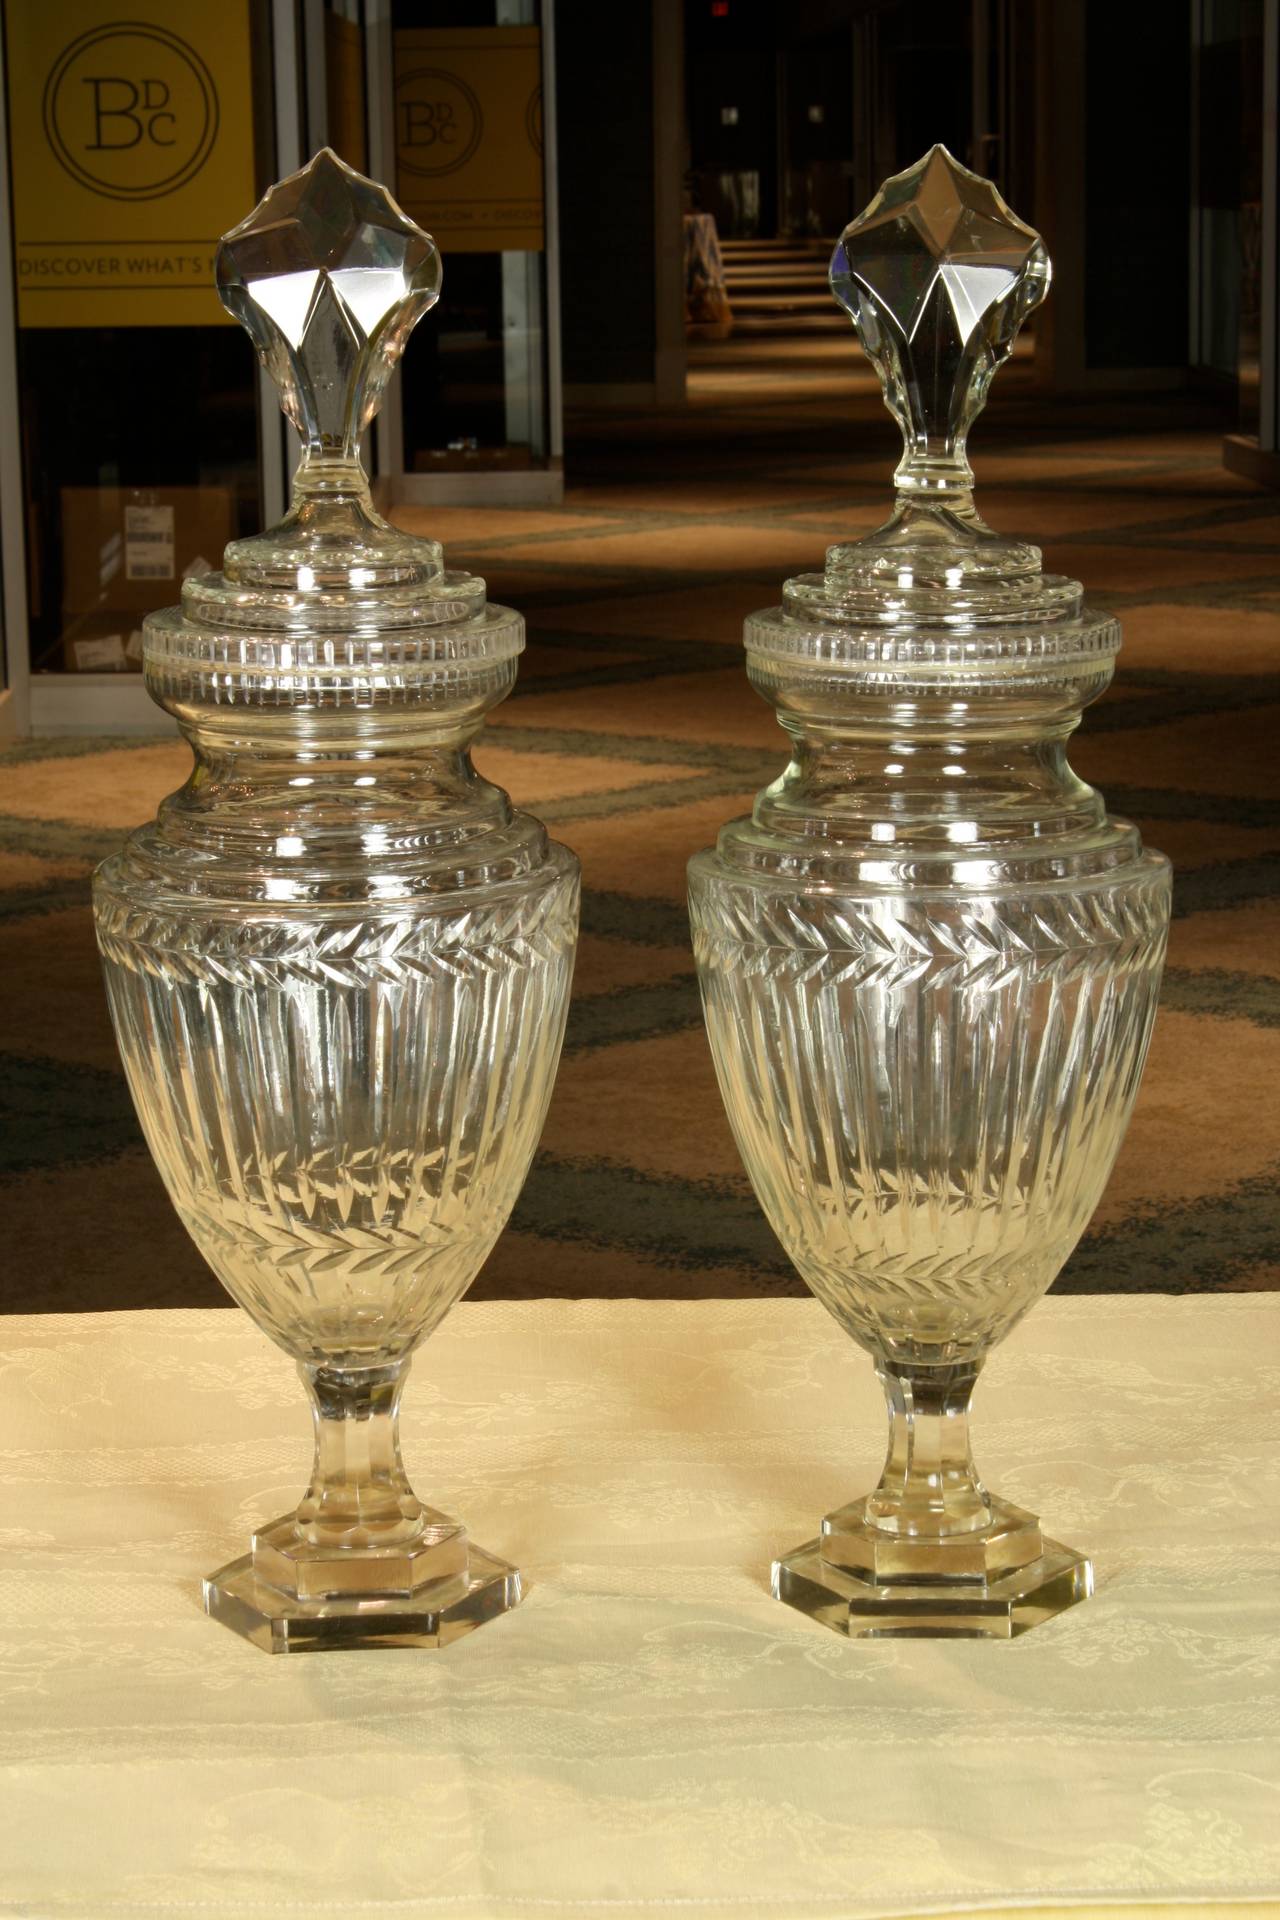 A pair of English hand-blown and cut-glass sweetmeat jars or urns, with glass covers topped with large cut-glass prism finials (Circa 1880).  Nice cut-glass leaf and other refined neoclassical decoration.